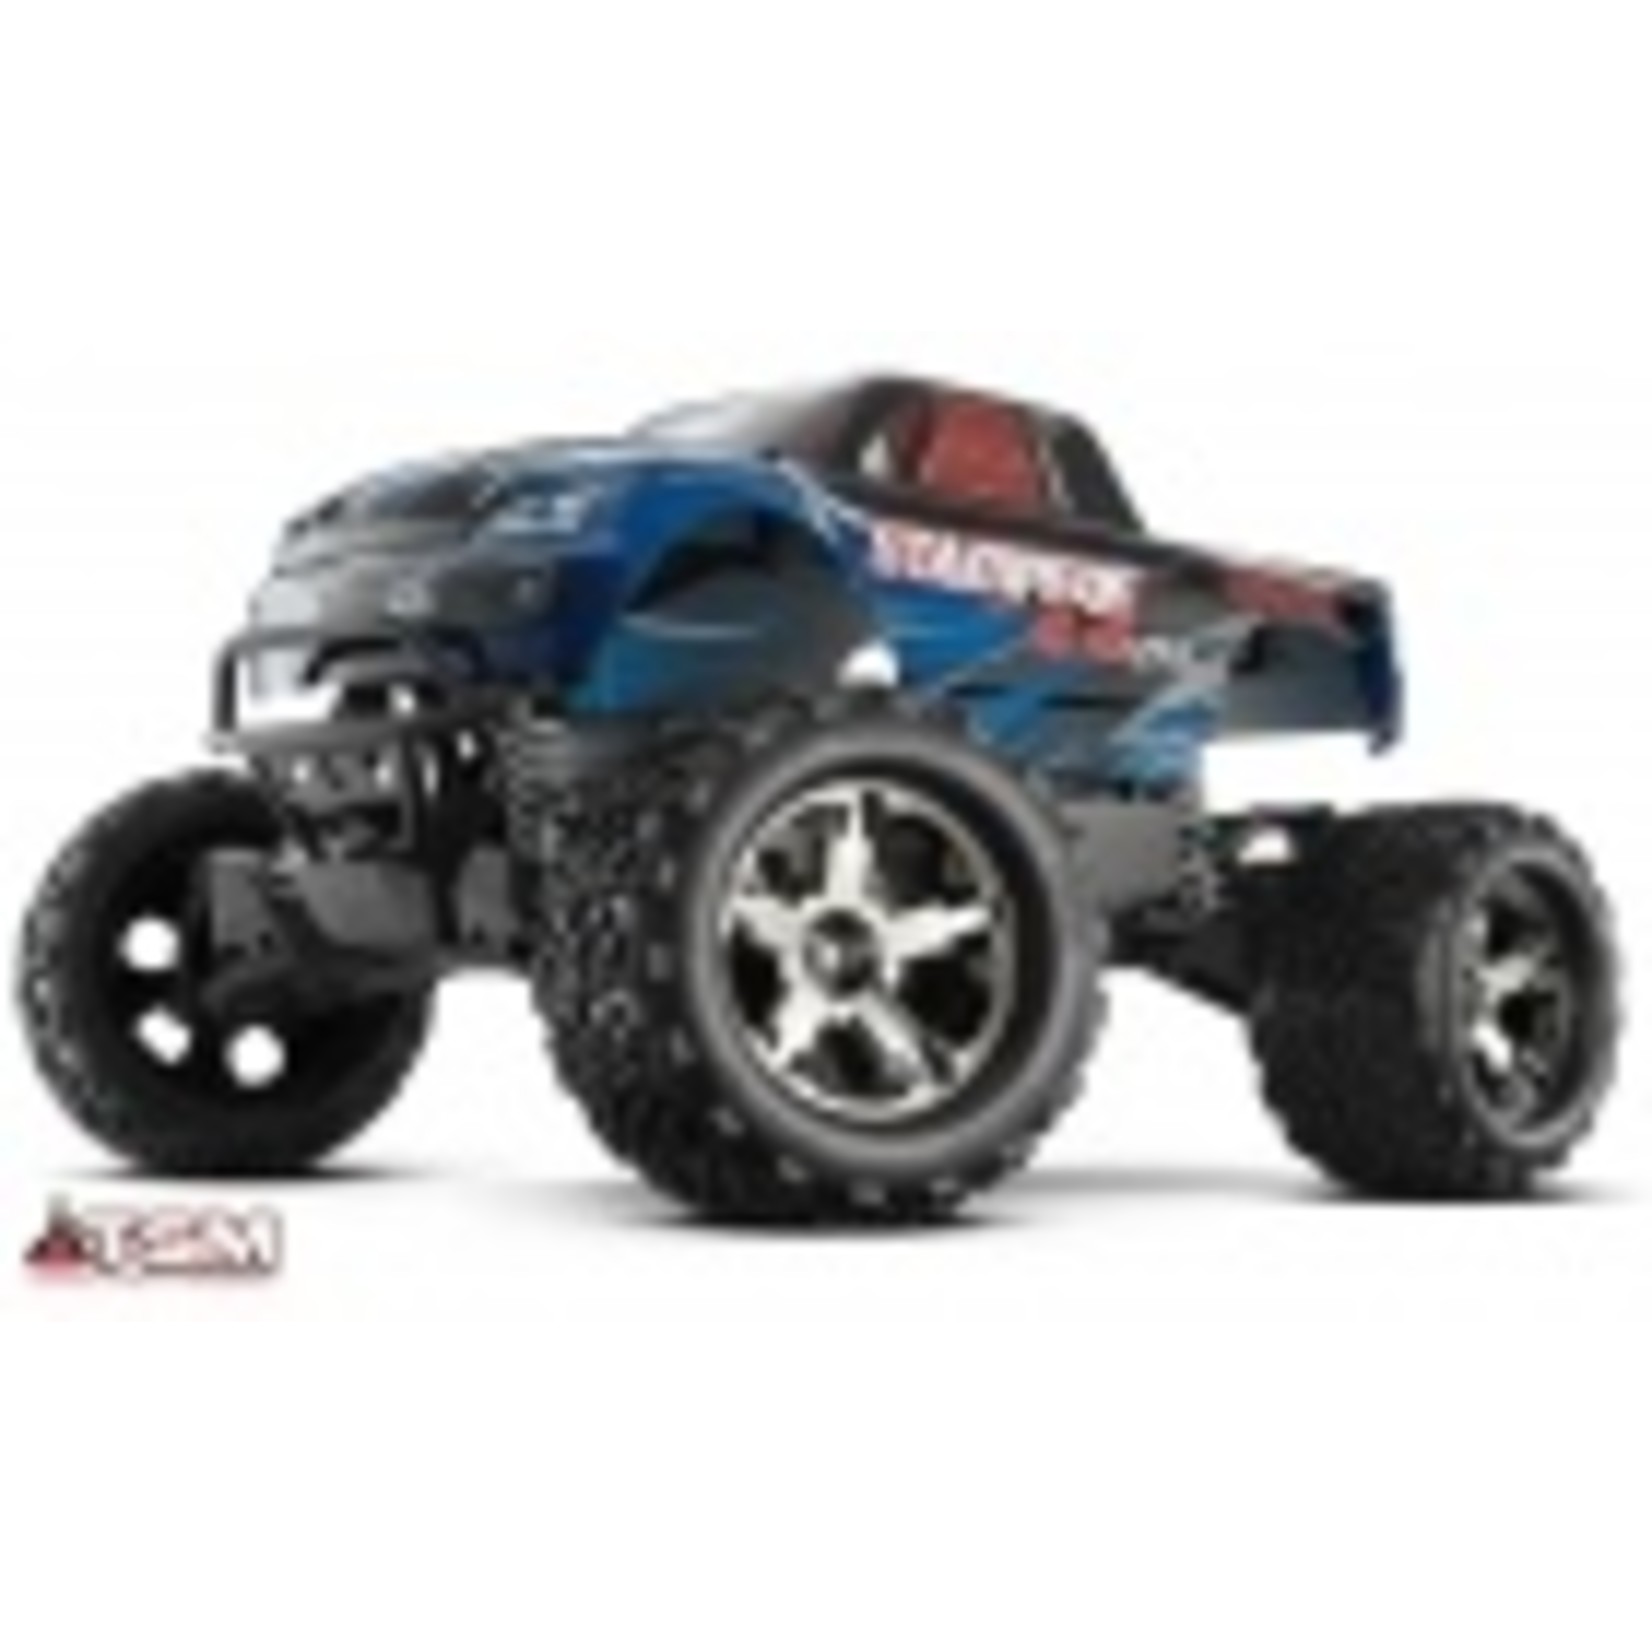 Traxxas 67086-4-BLUE Stampede® 4X4 VXL: 1/10 Scale Monster Truck with TQi™ Traxxas Link™ Enabled 2.4GHz Radio System & Traxxas Stability Management (TSM)®